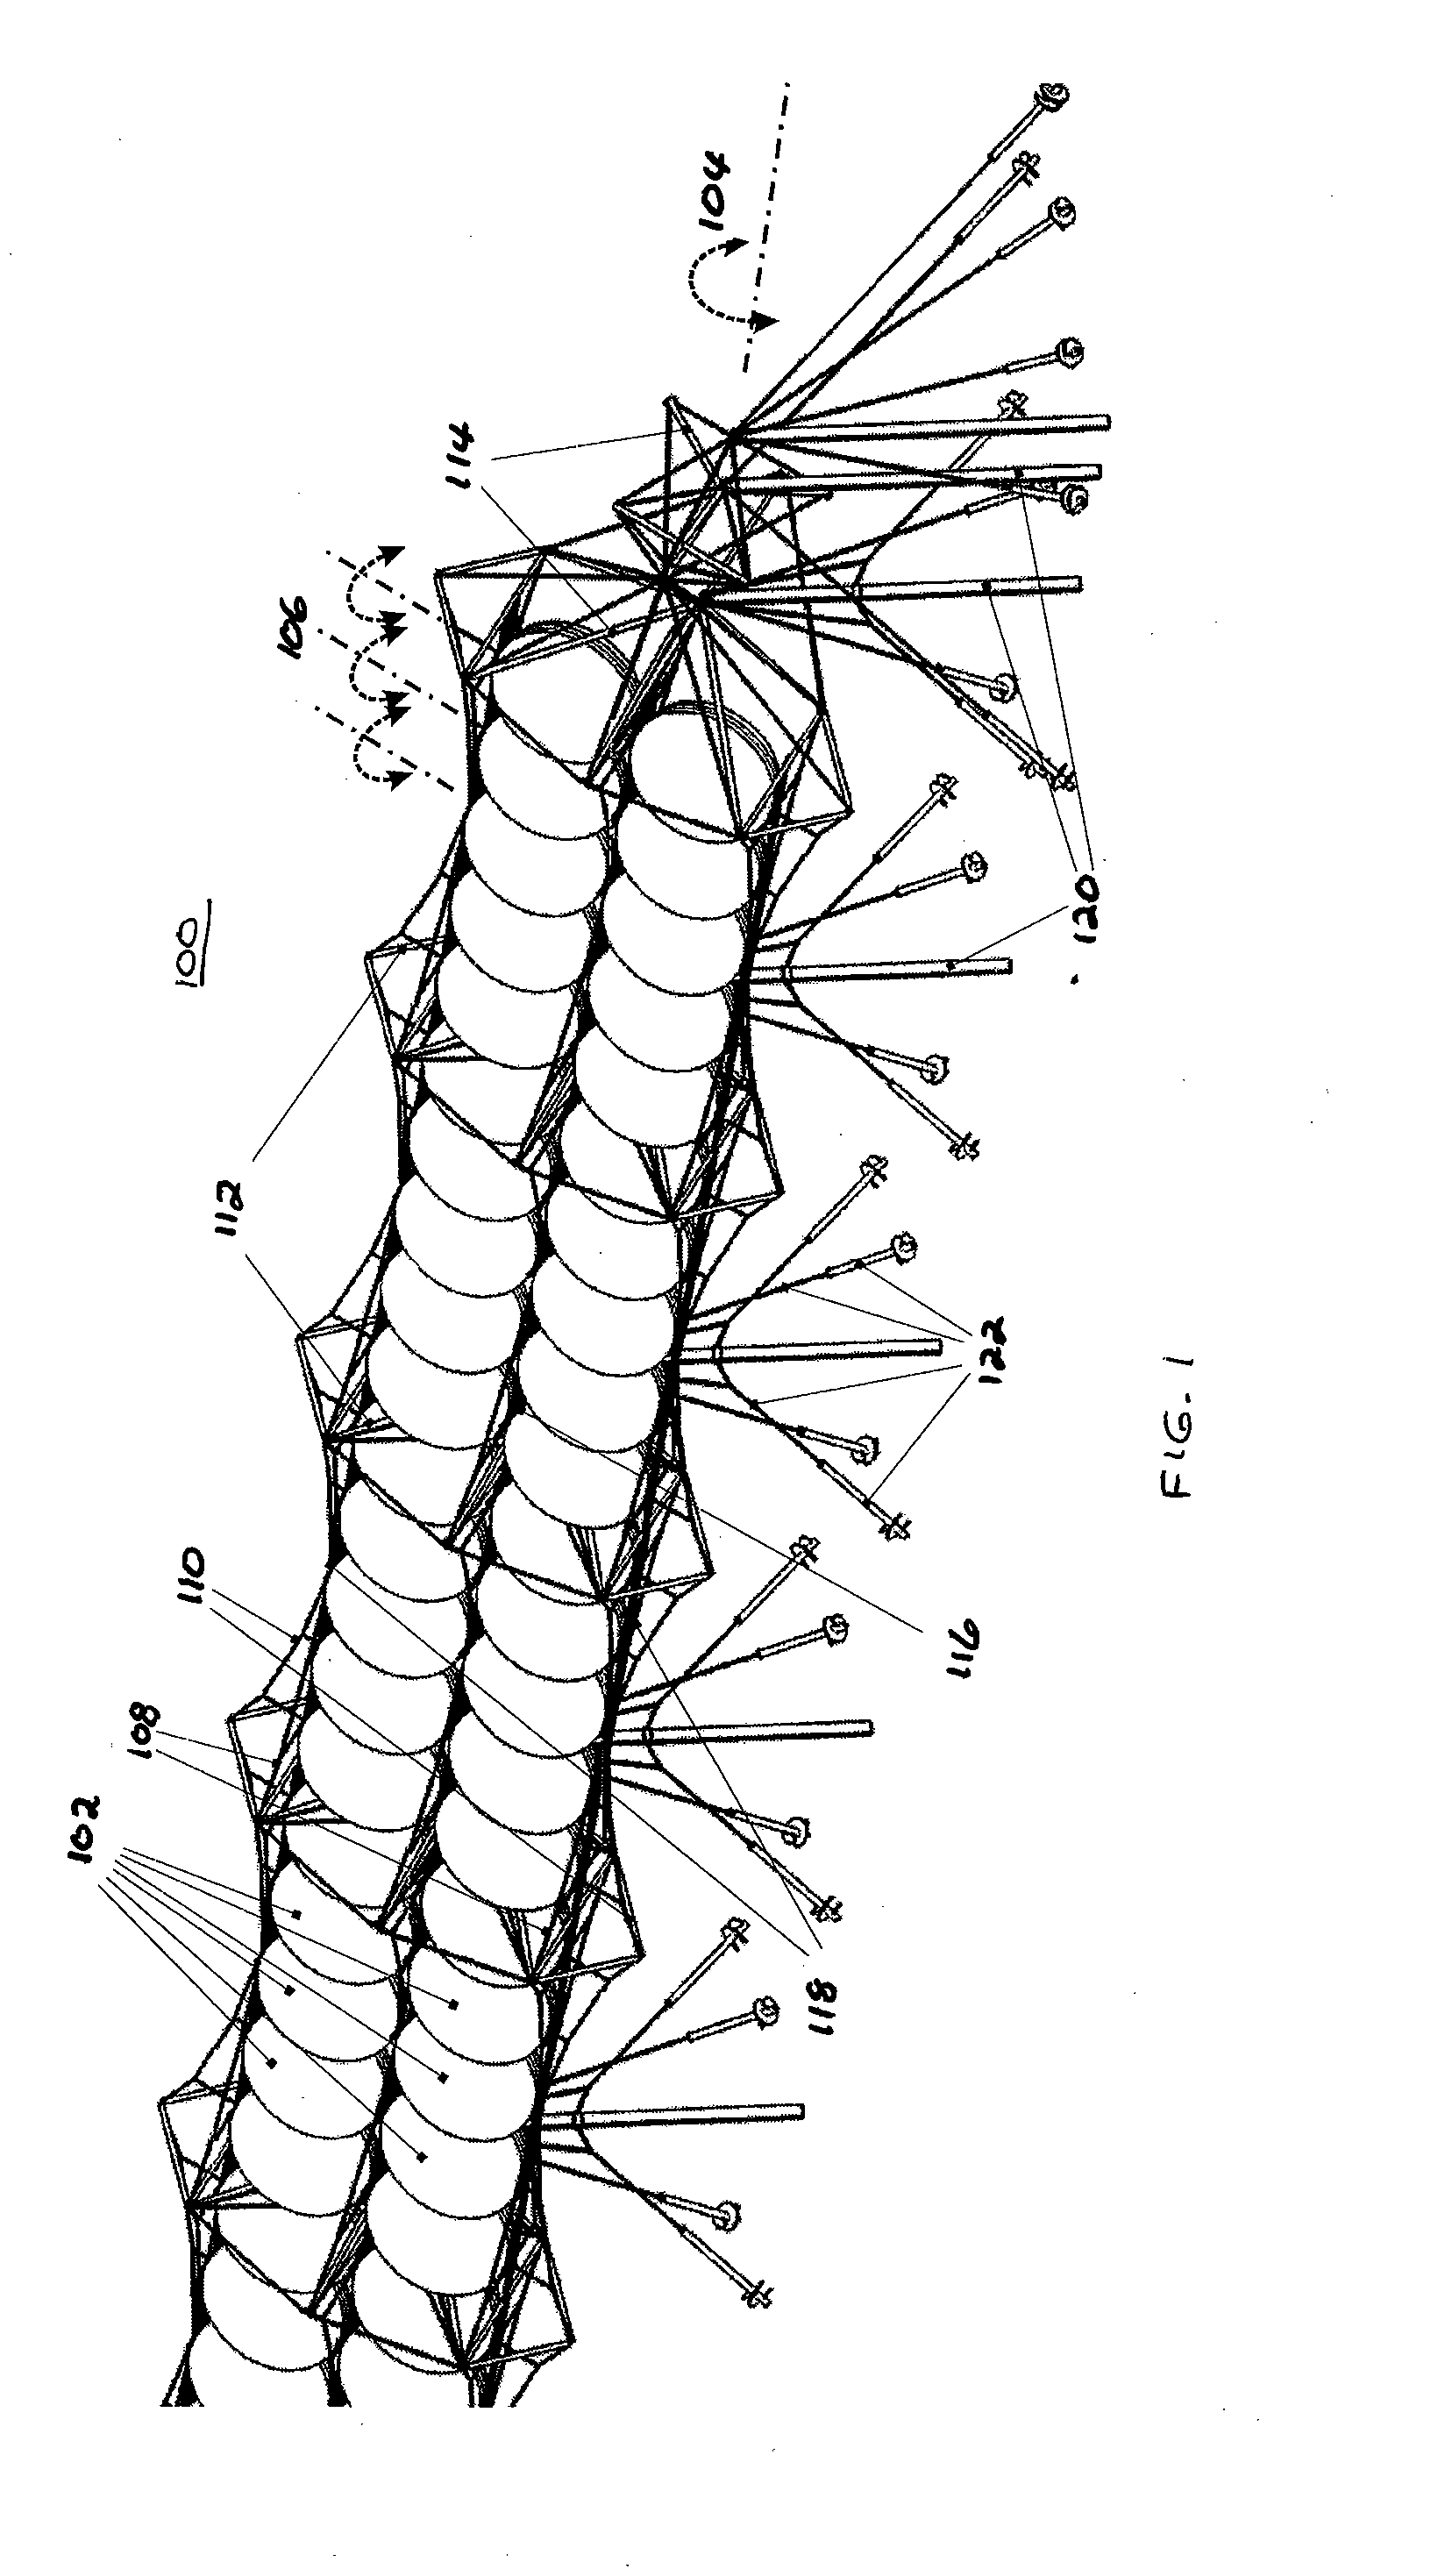 Rigging system for supporting and pointing solar concentrator arrays